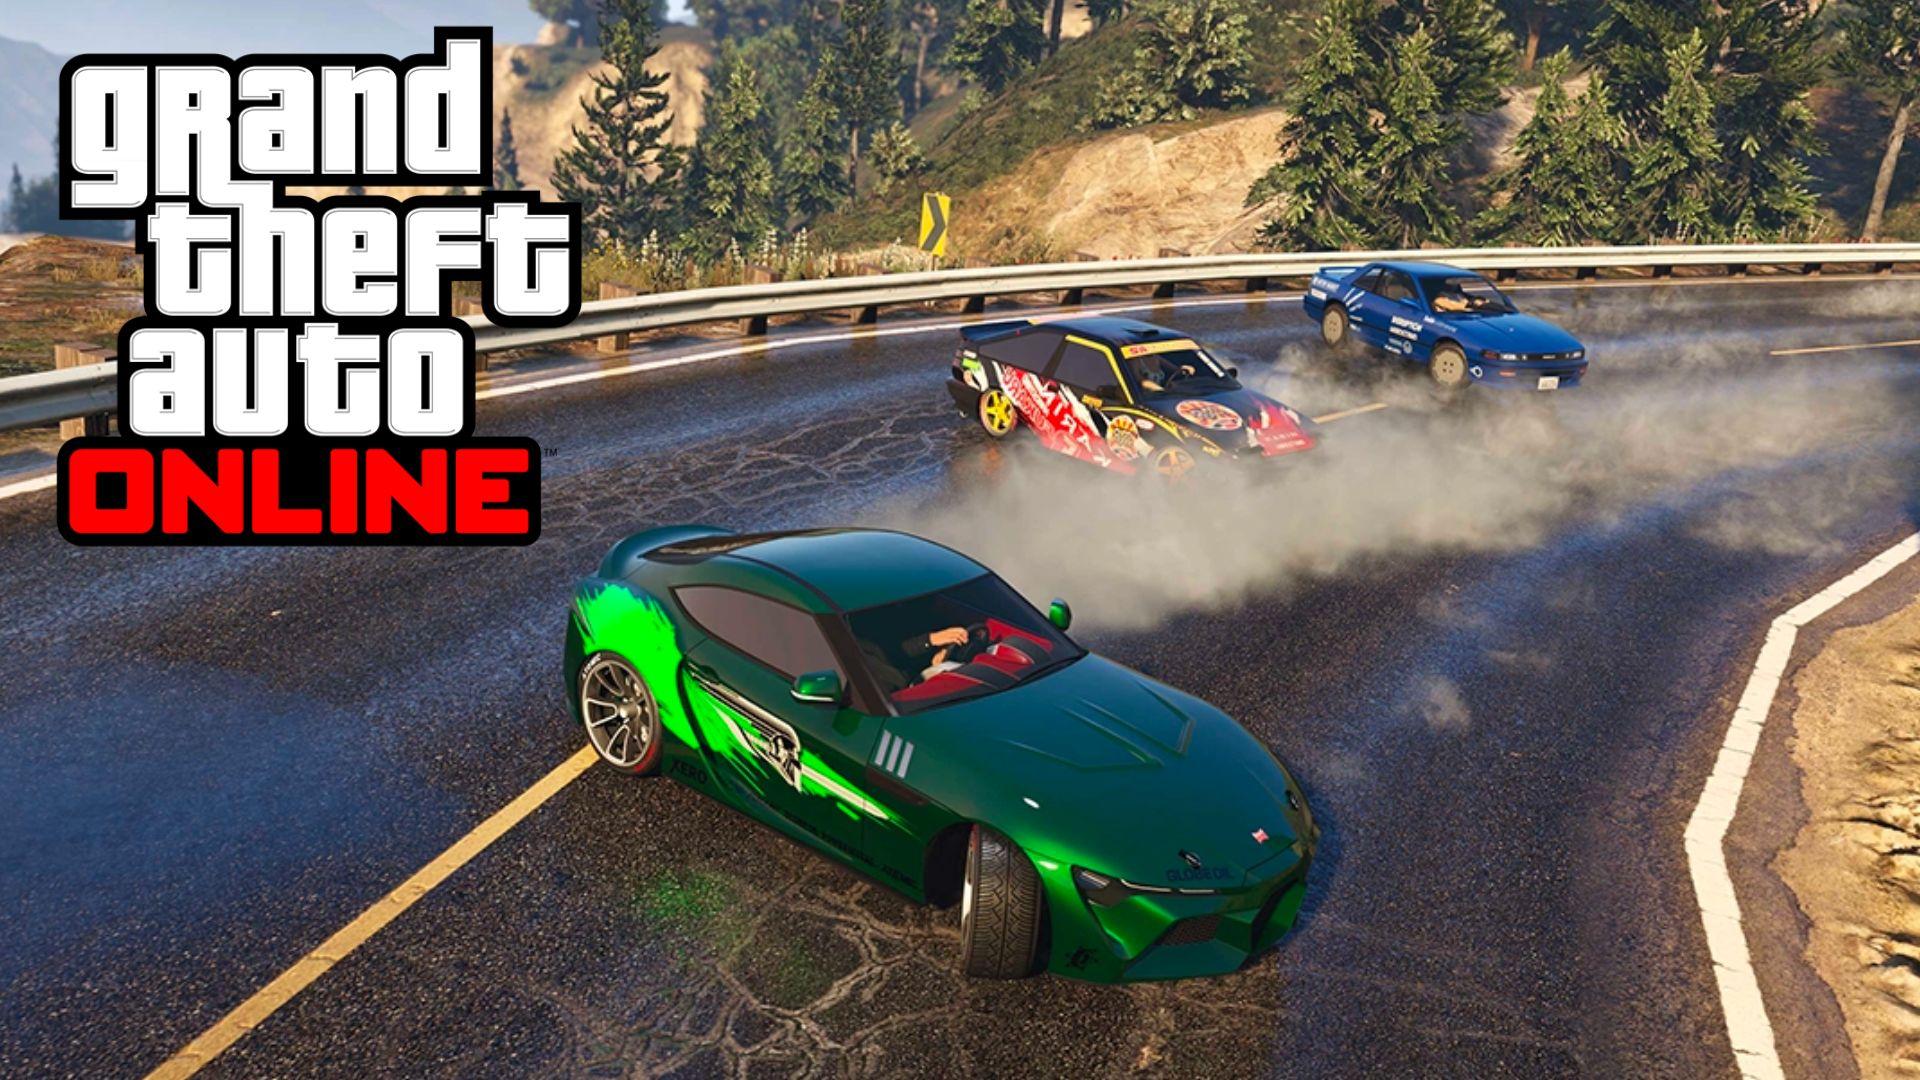 GTA Online cars drifting on hill in chop shop update